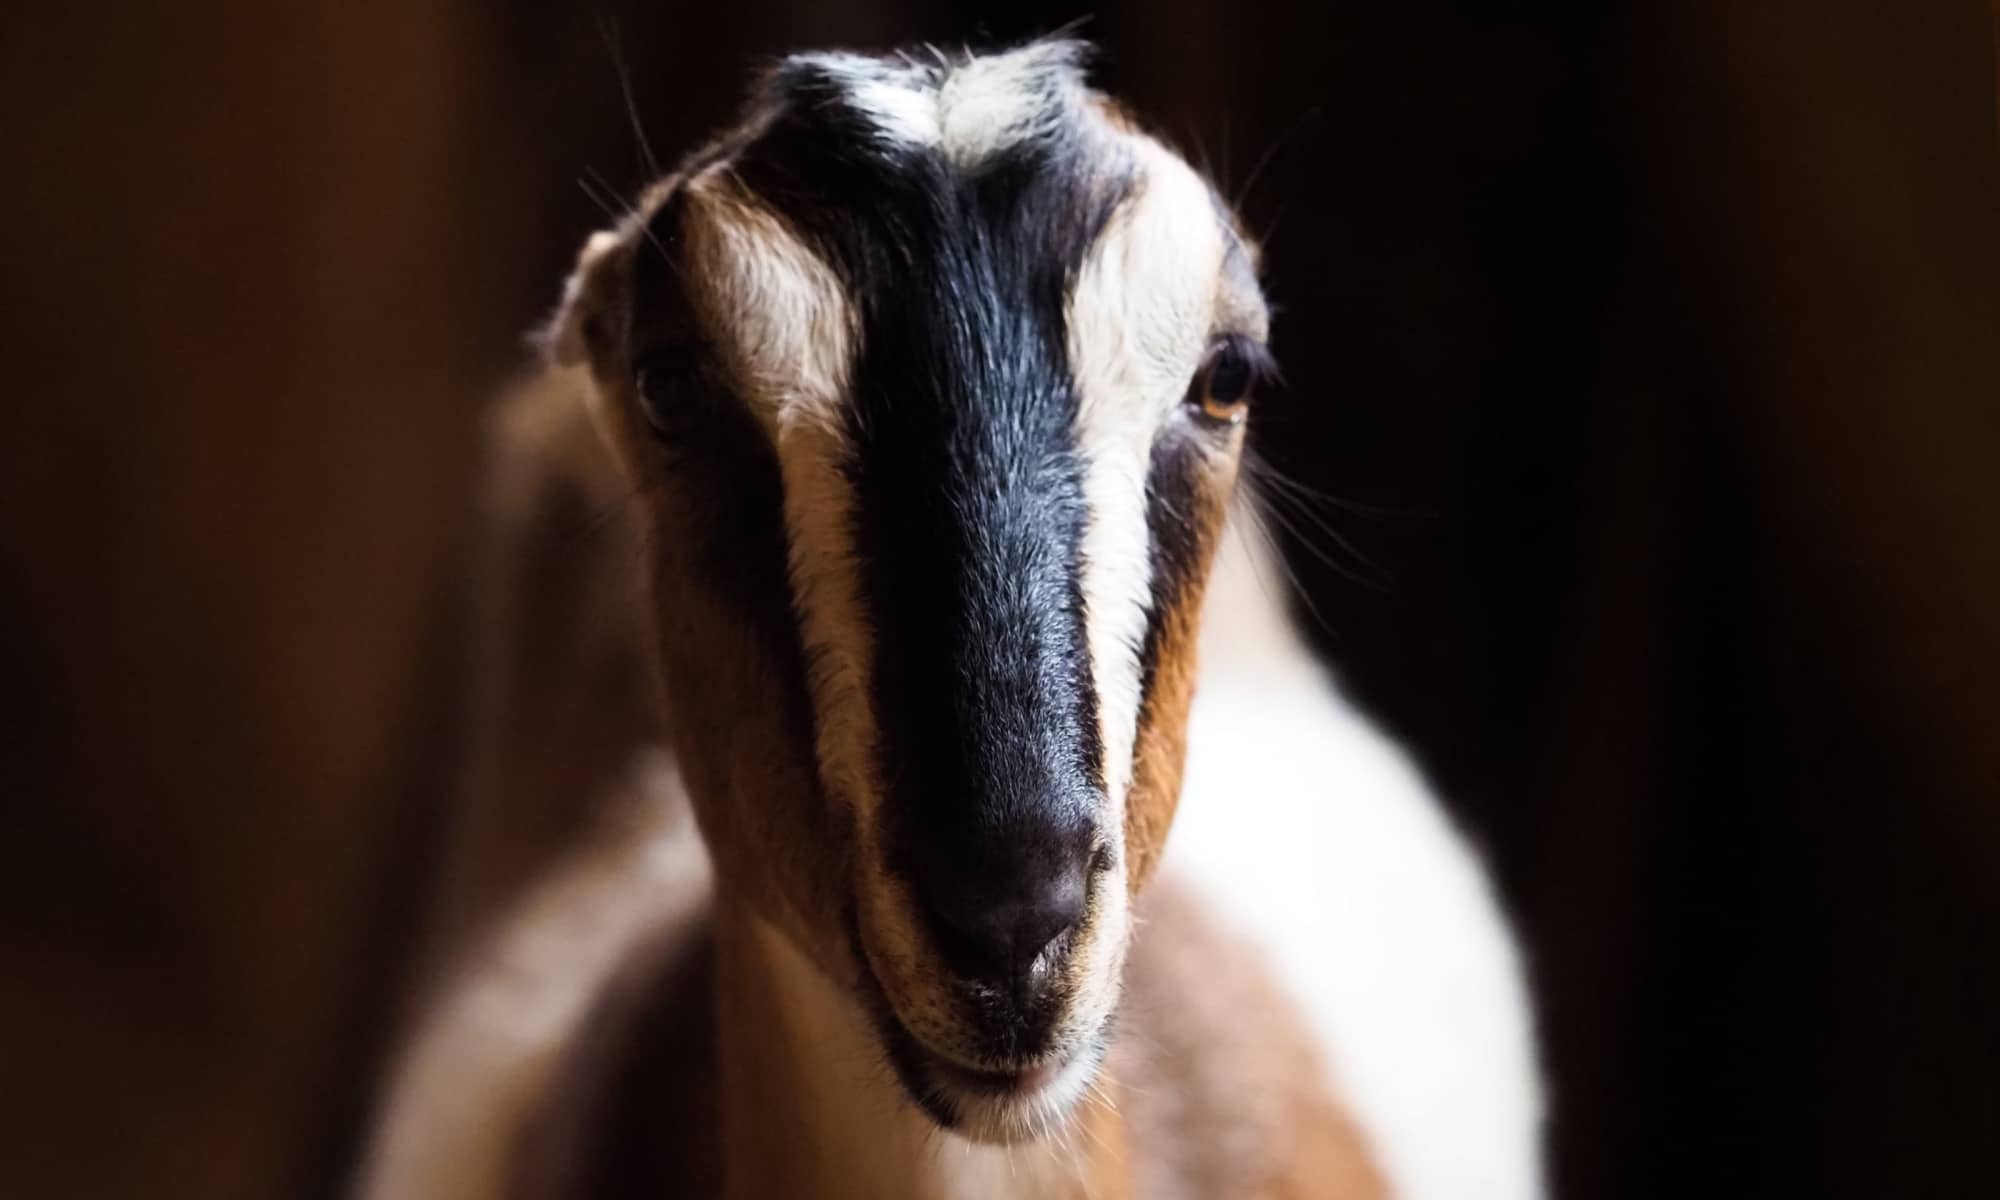 Goat With No Ears? No Way! Here's What You Need to Know - AZ Animals